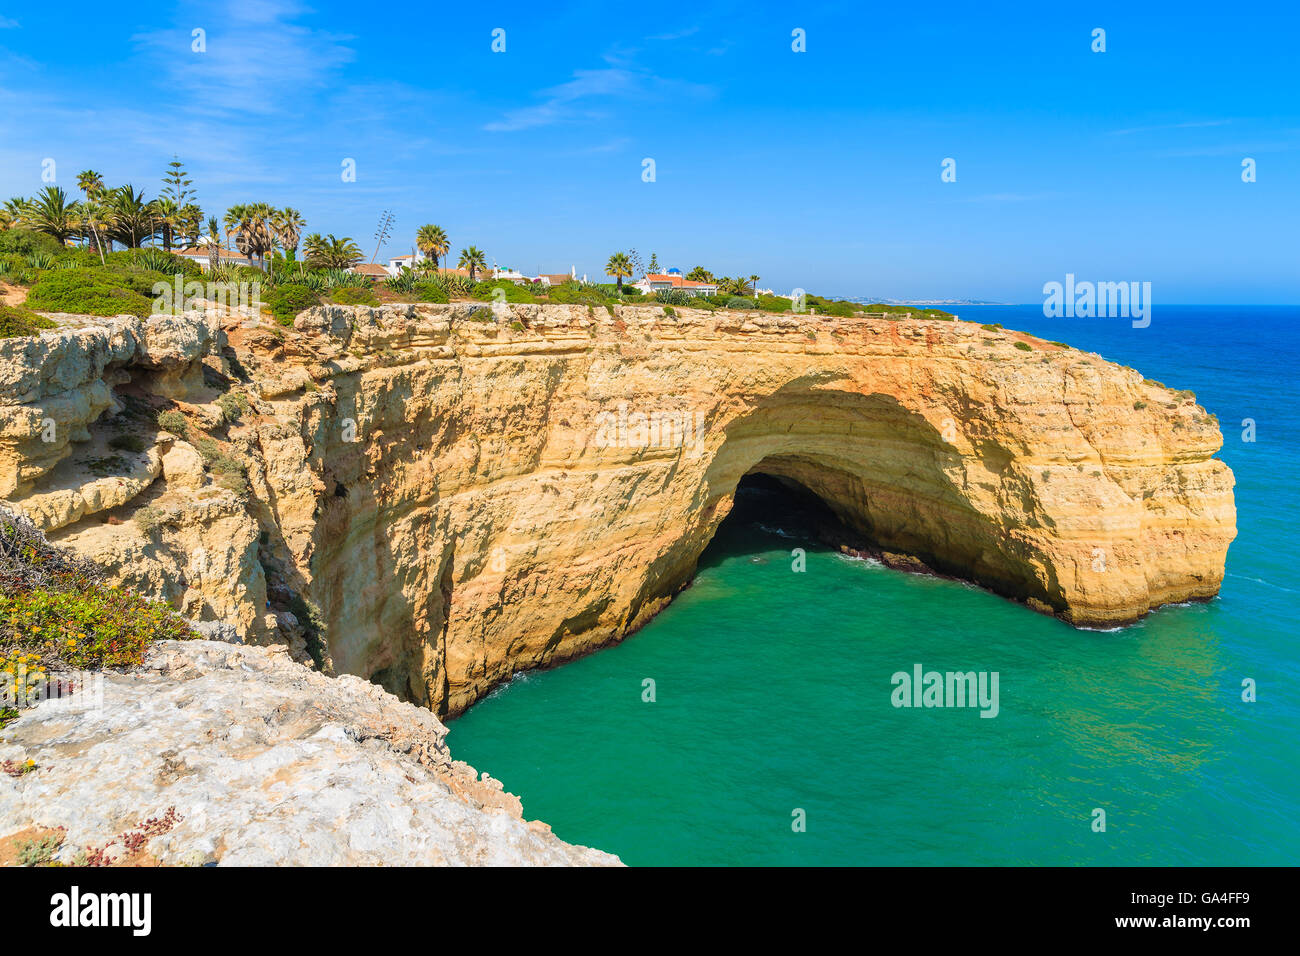 Cliff cave and turquoise ocean on coast of Portugal near Carvoeiro town, Algarve region Stock Photo